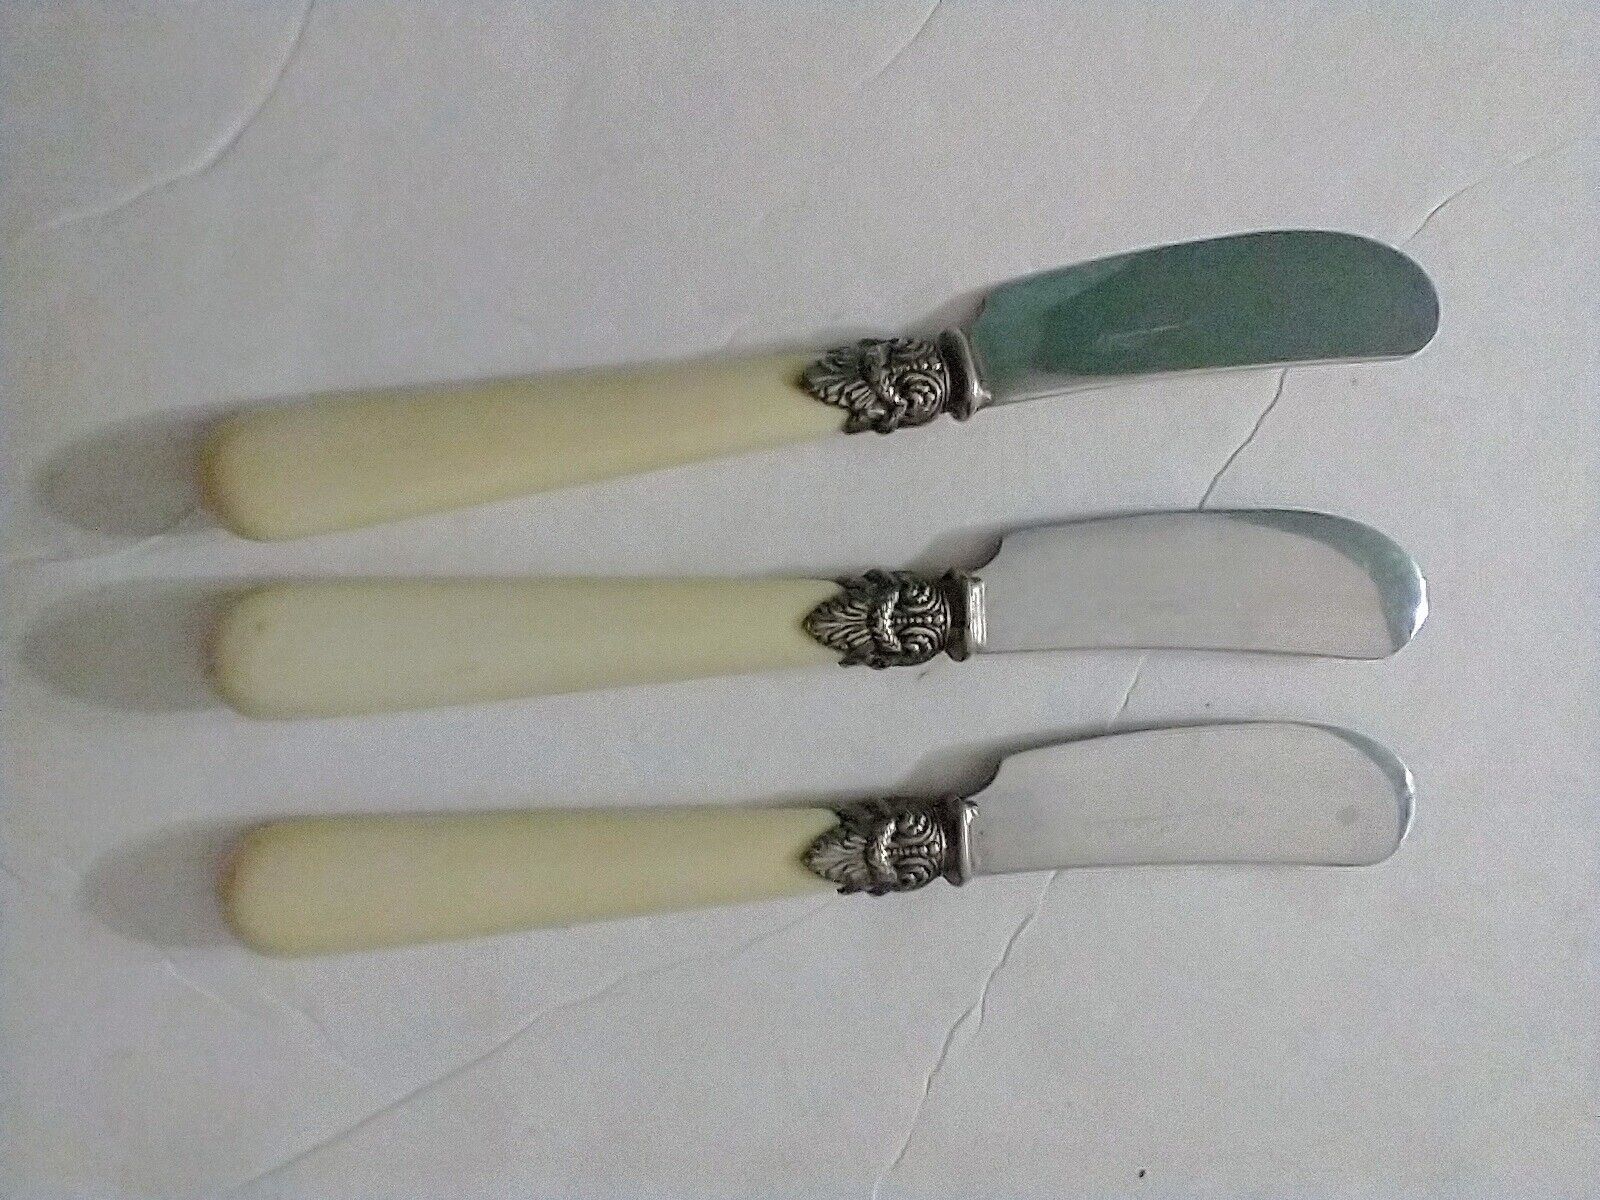 VINTAGE INOX Italy 3 Butter Spreaders 18/10 with Ivory Colored Handle